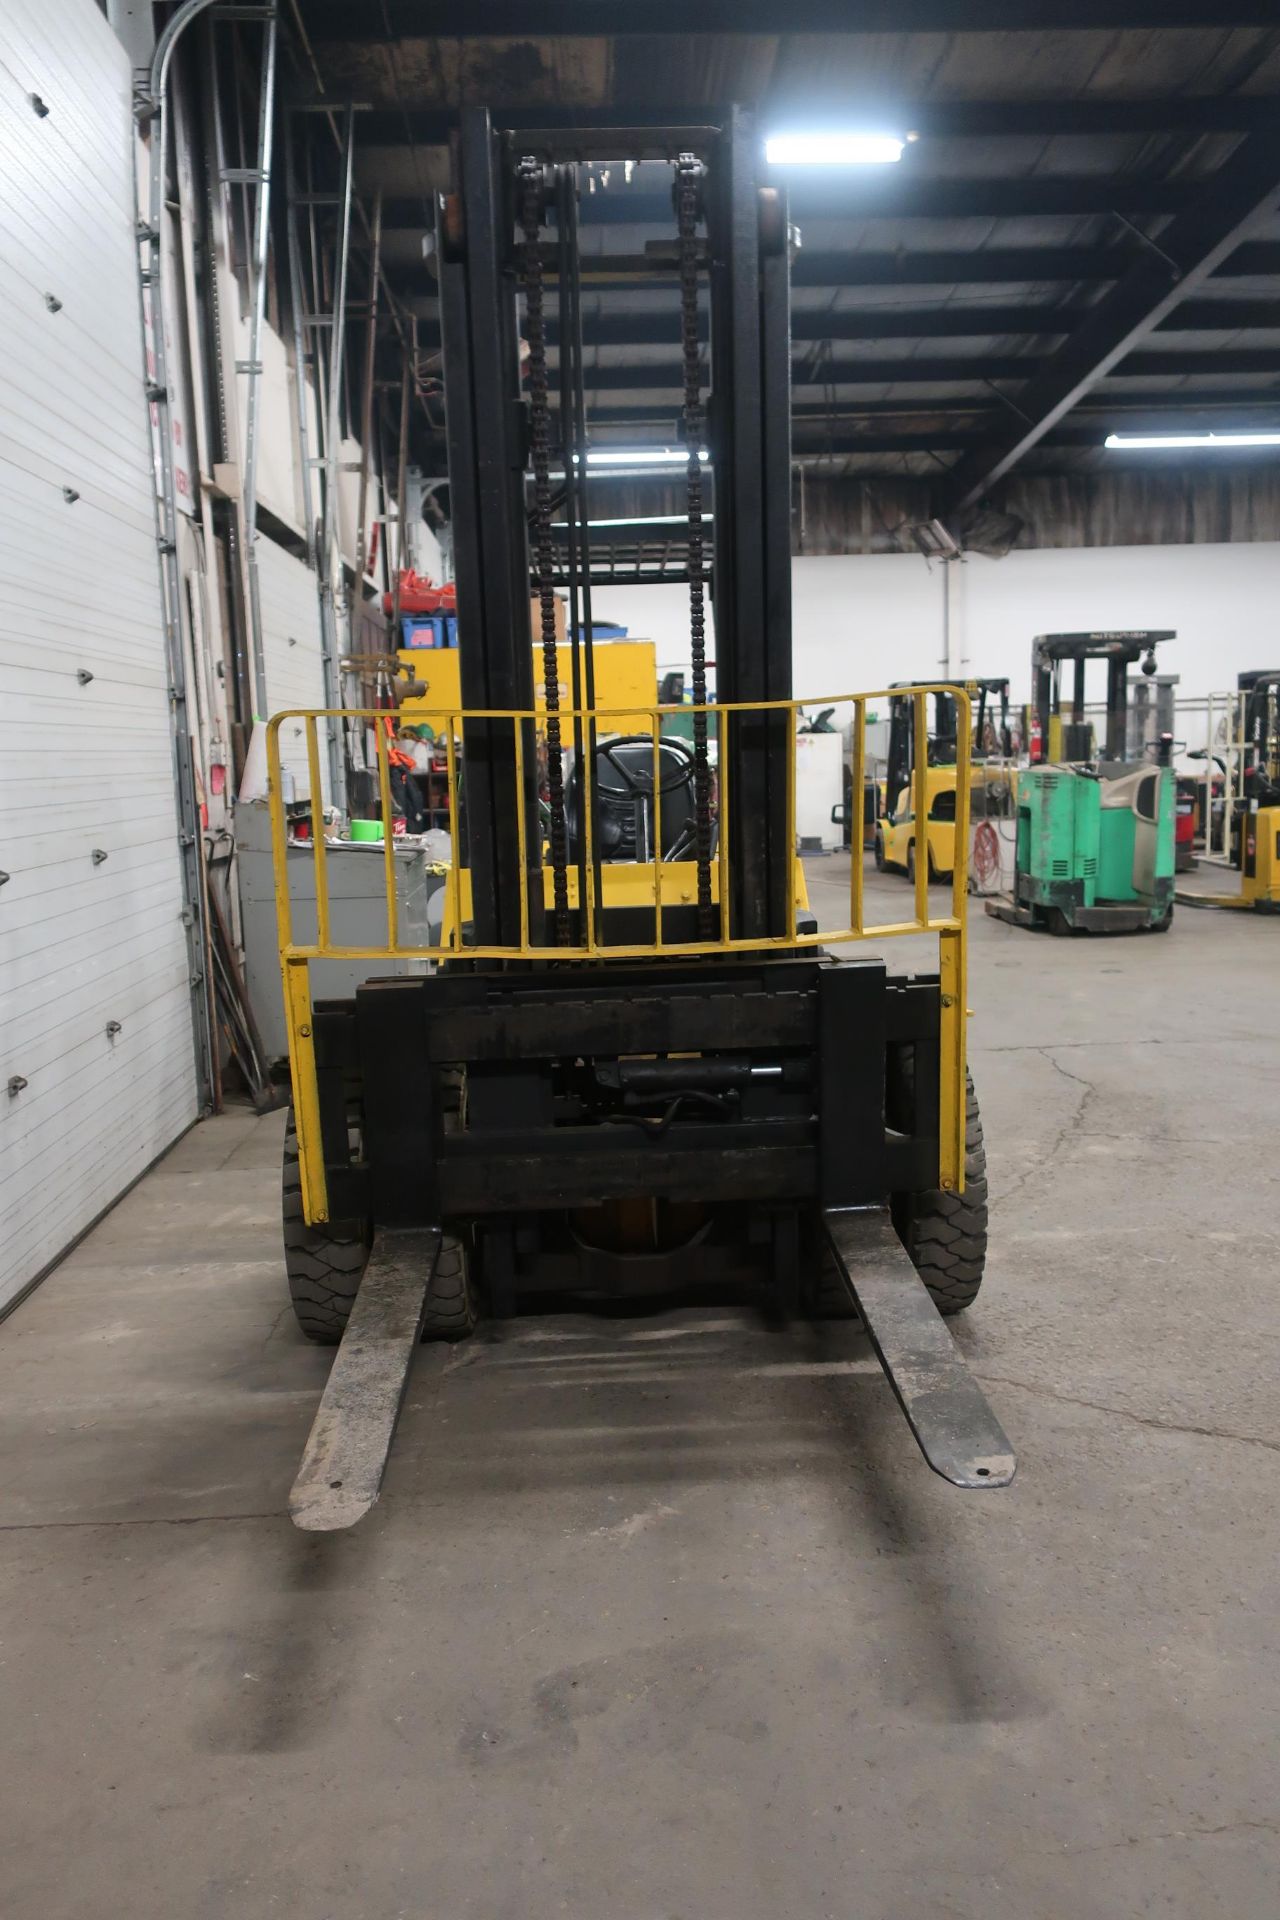 FREE CUSTOMS - Hyster 8000lbs Capacity Forklift with sideshift - LPG (propane) unit (no propane - Image 2 of 2